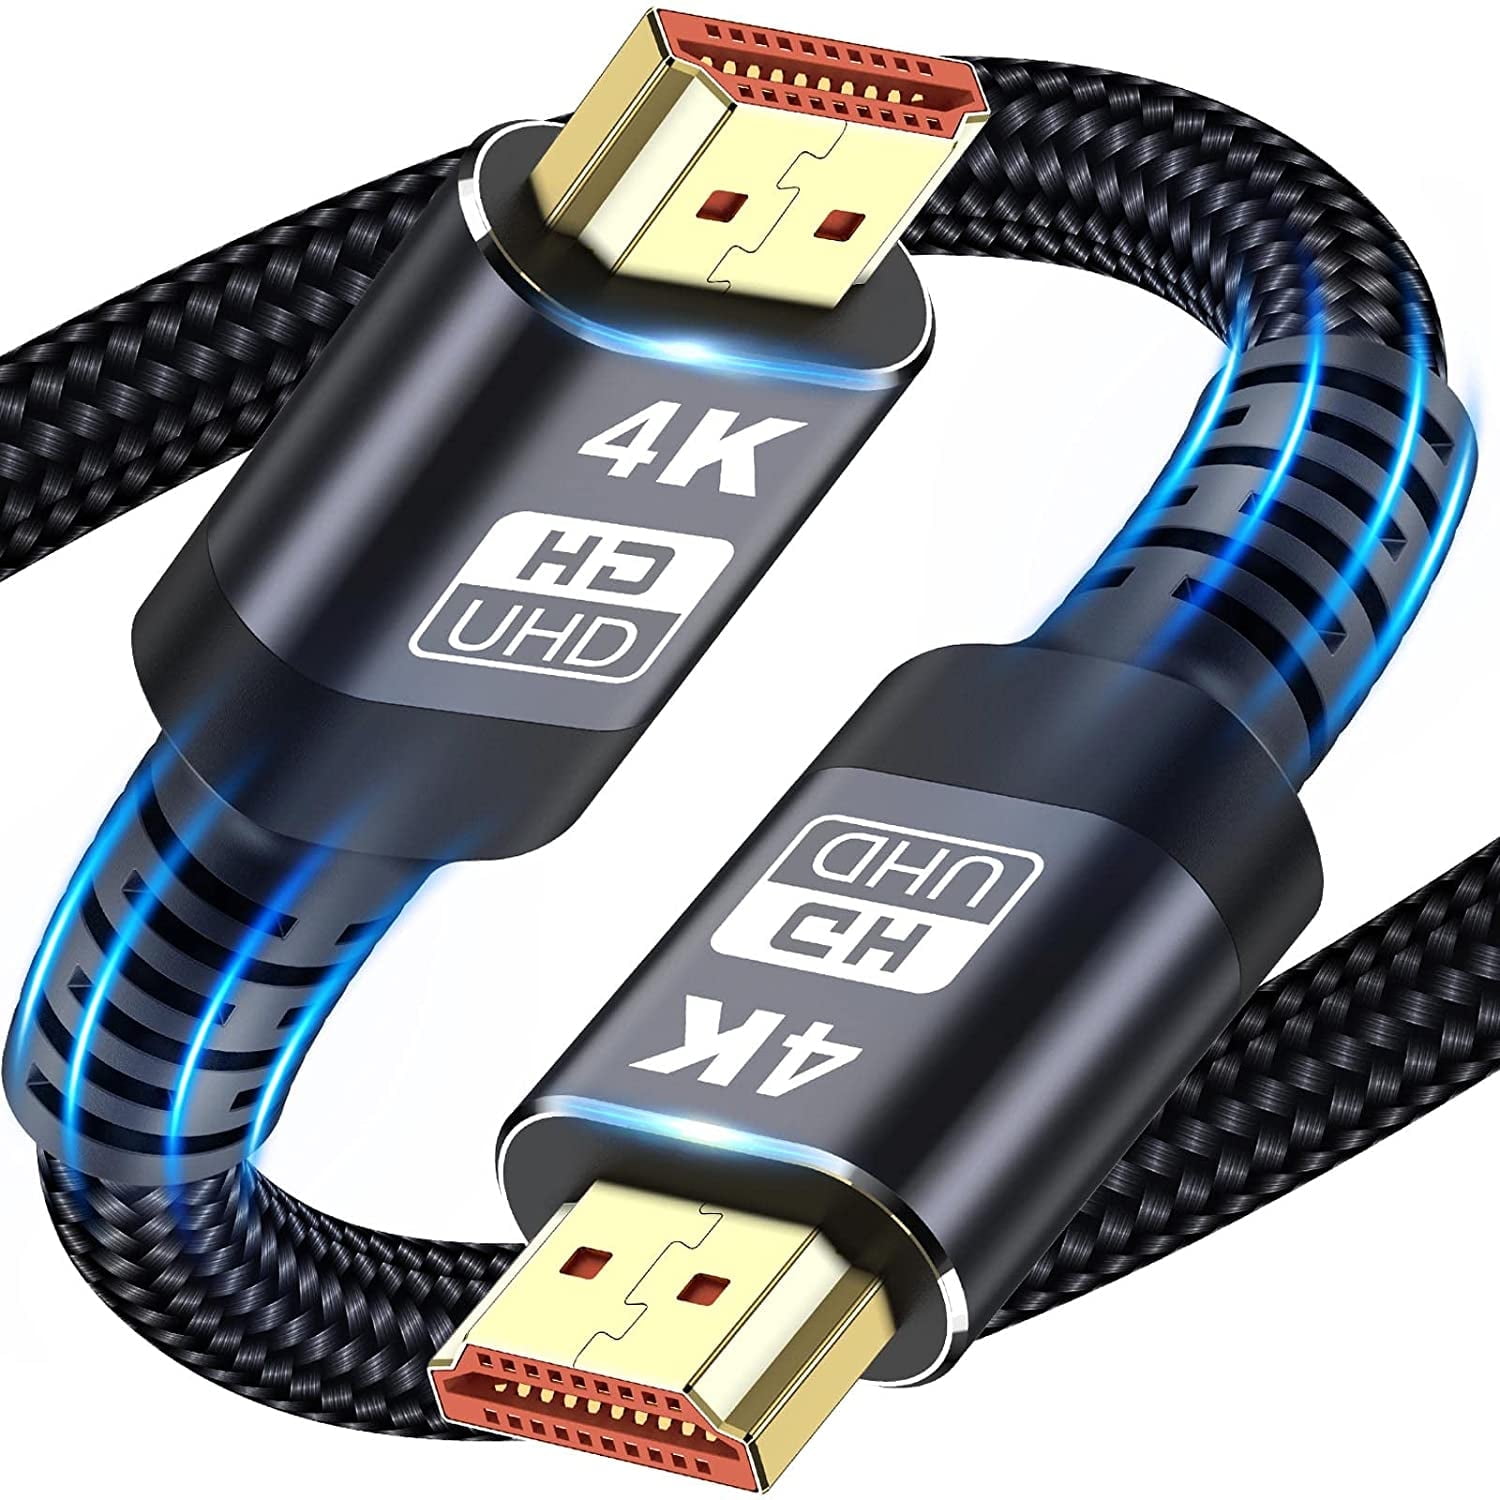 UCEC Left-Angled Micro HDMI to HDMI Male Cable Stretched Length